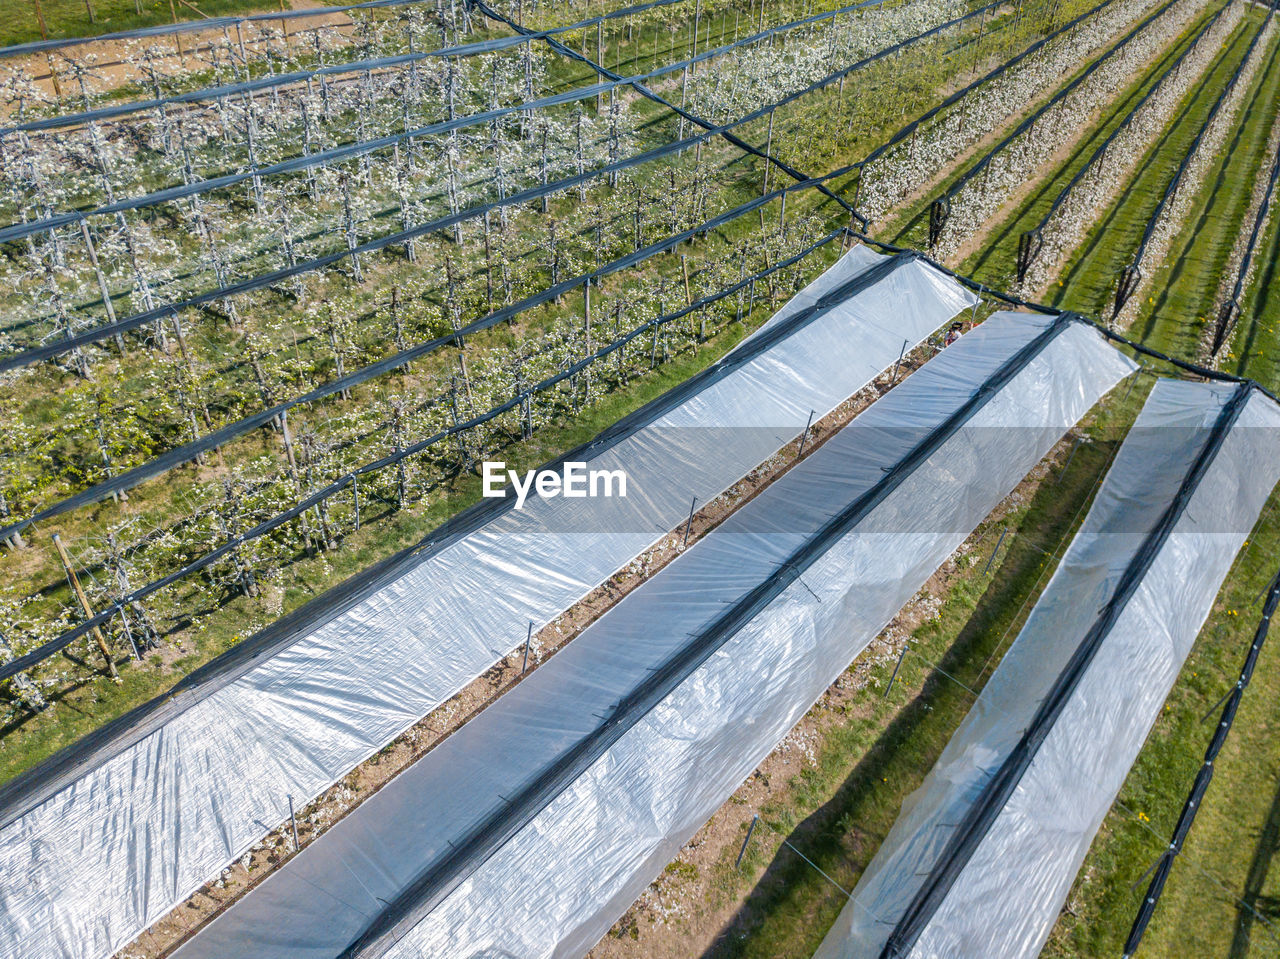 HIGH ANGLE VIEW OF GREENHOUSE FIELD